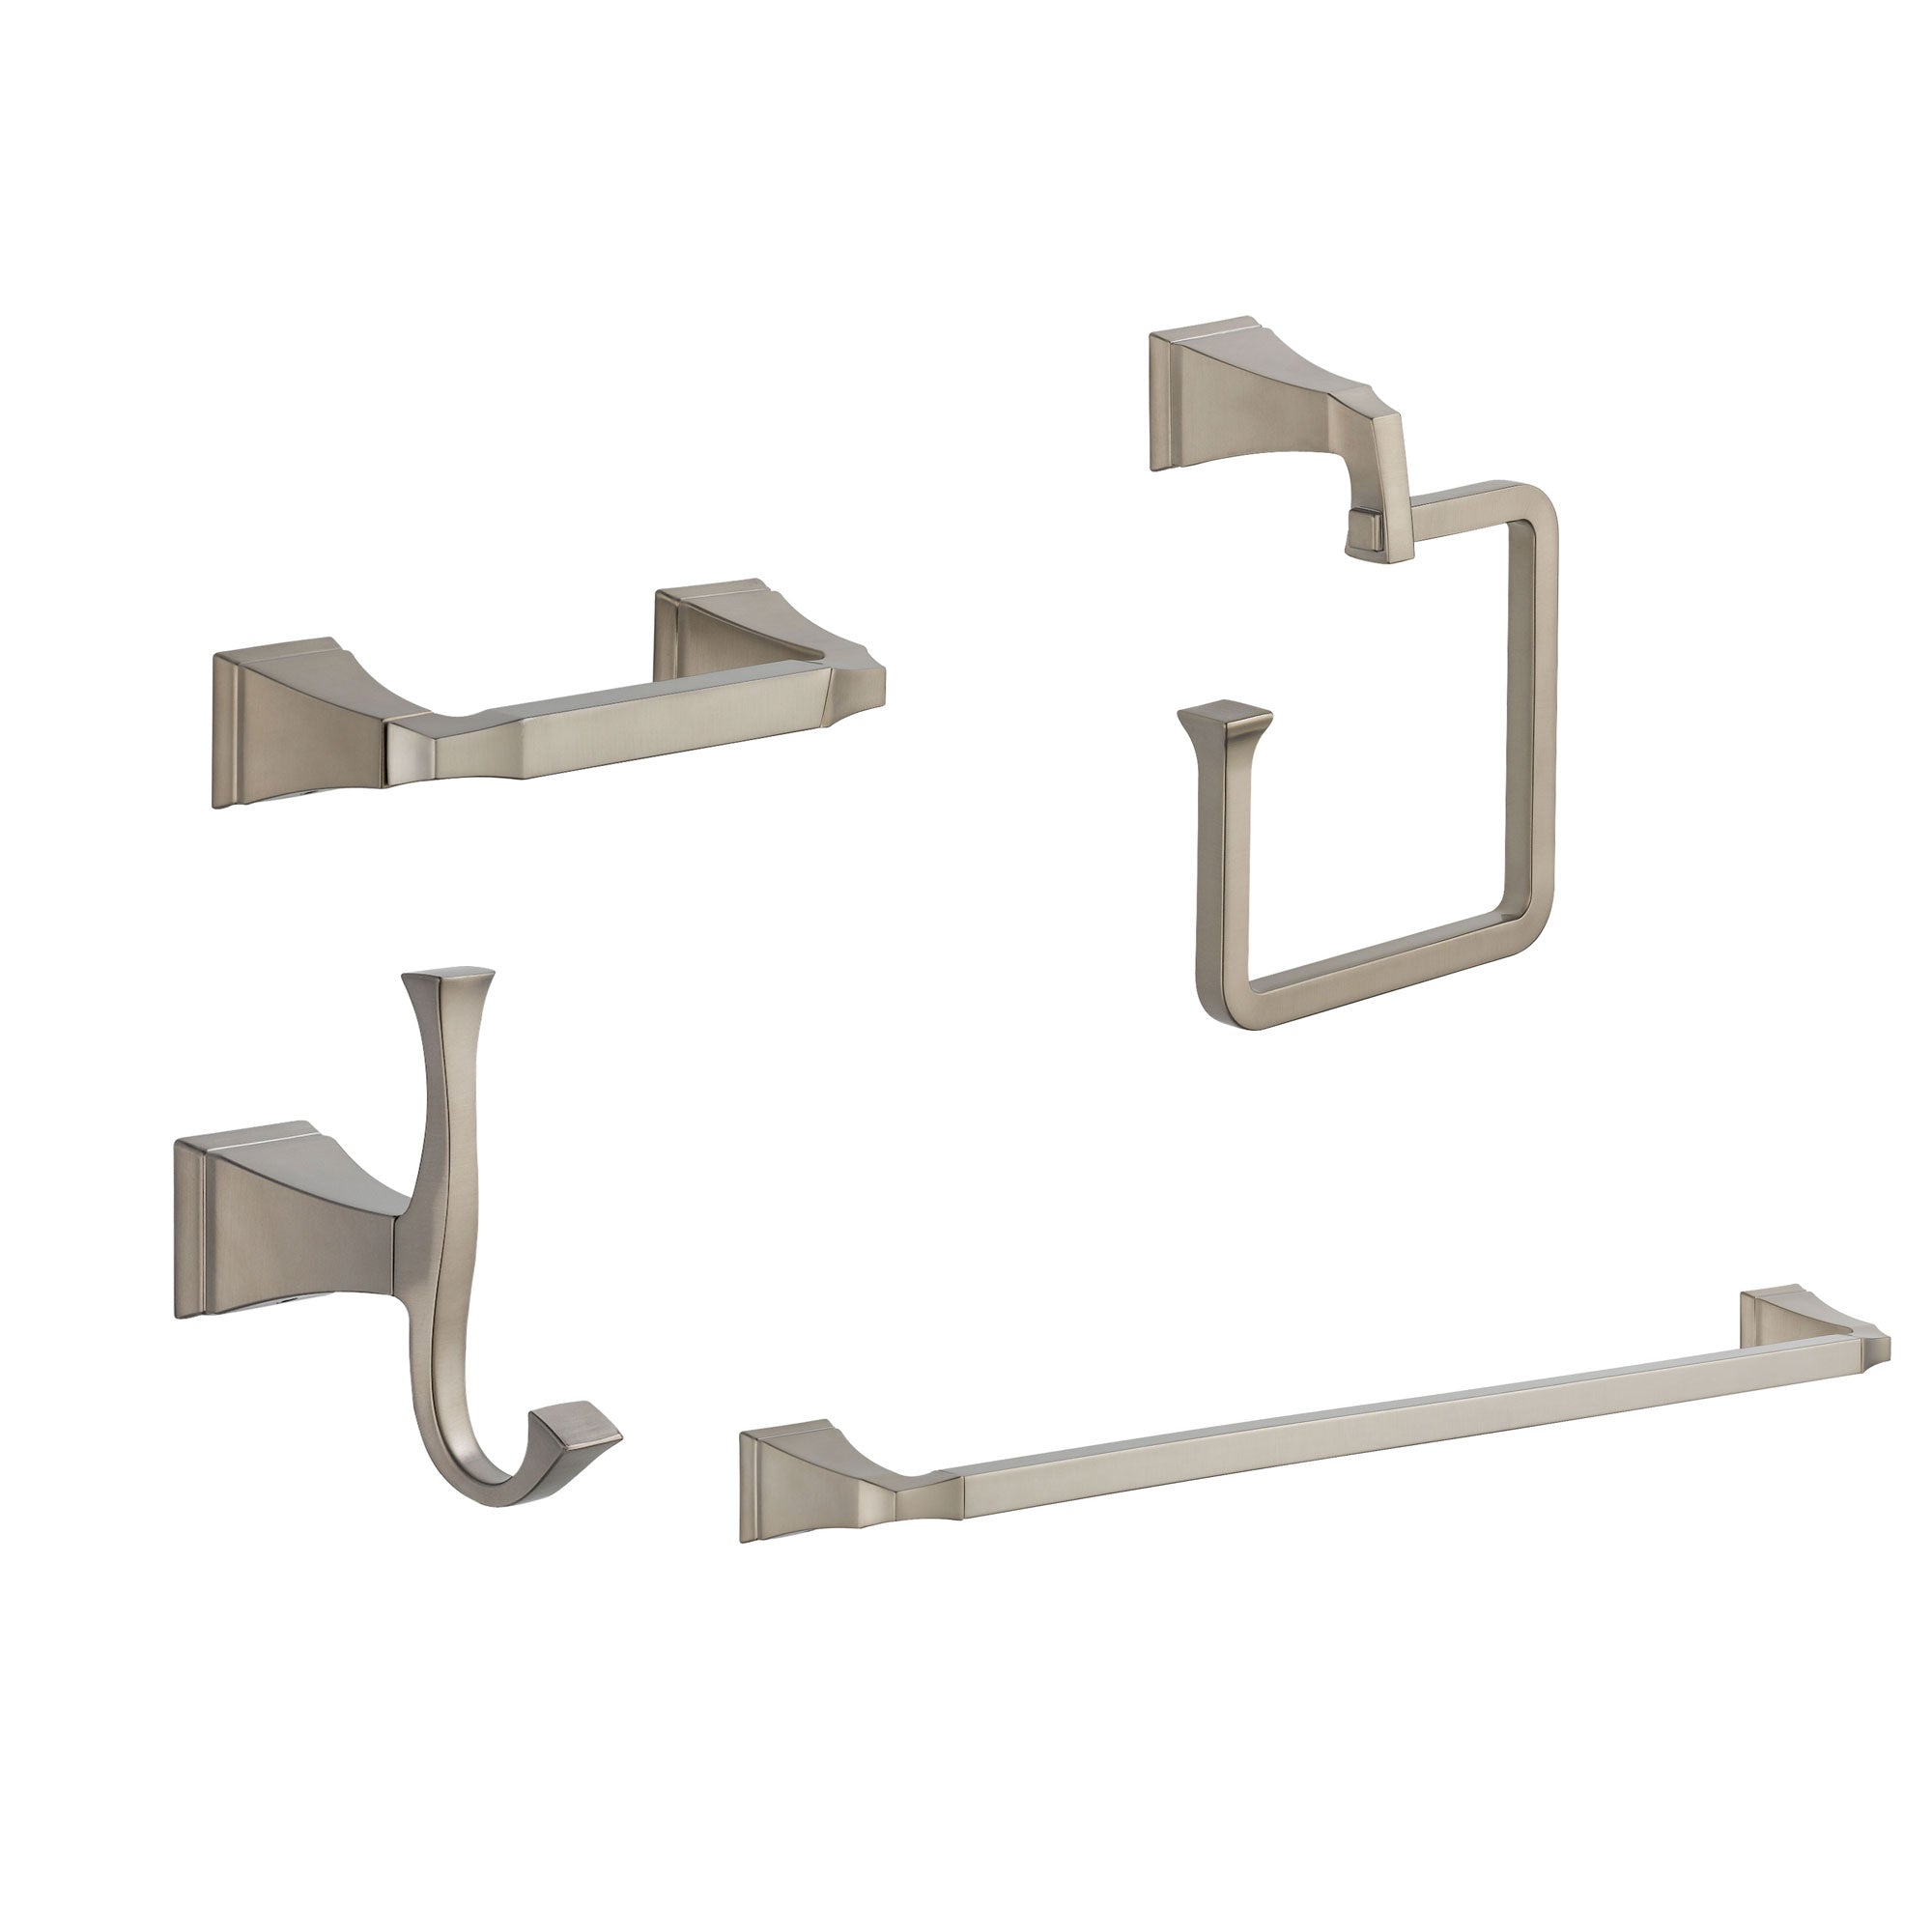 Delta Dryden Stainless Steel Finish STANDARD Bathroom Accessory Set Includes: 24" Towel Bar, Toilet Paper Holder, Robe Hook, and Towel Ring D10035AP